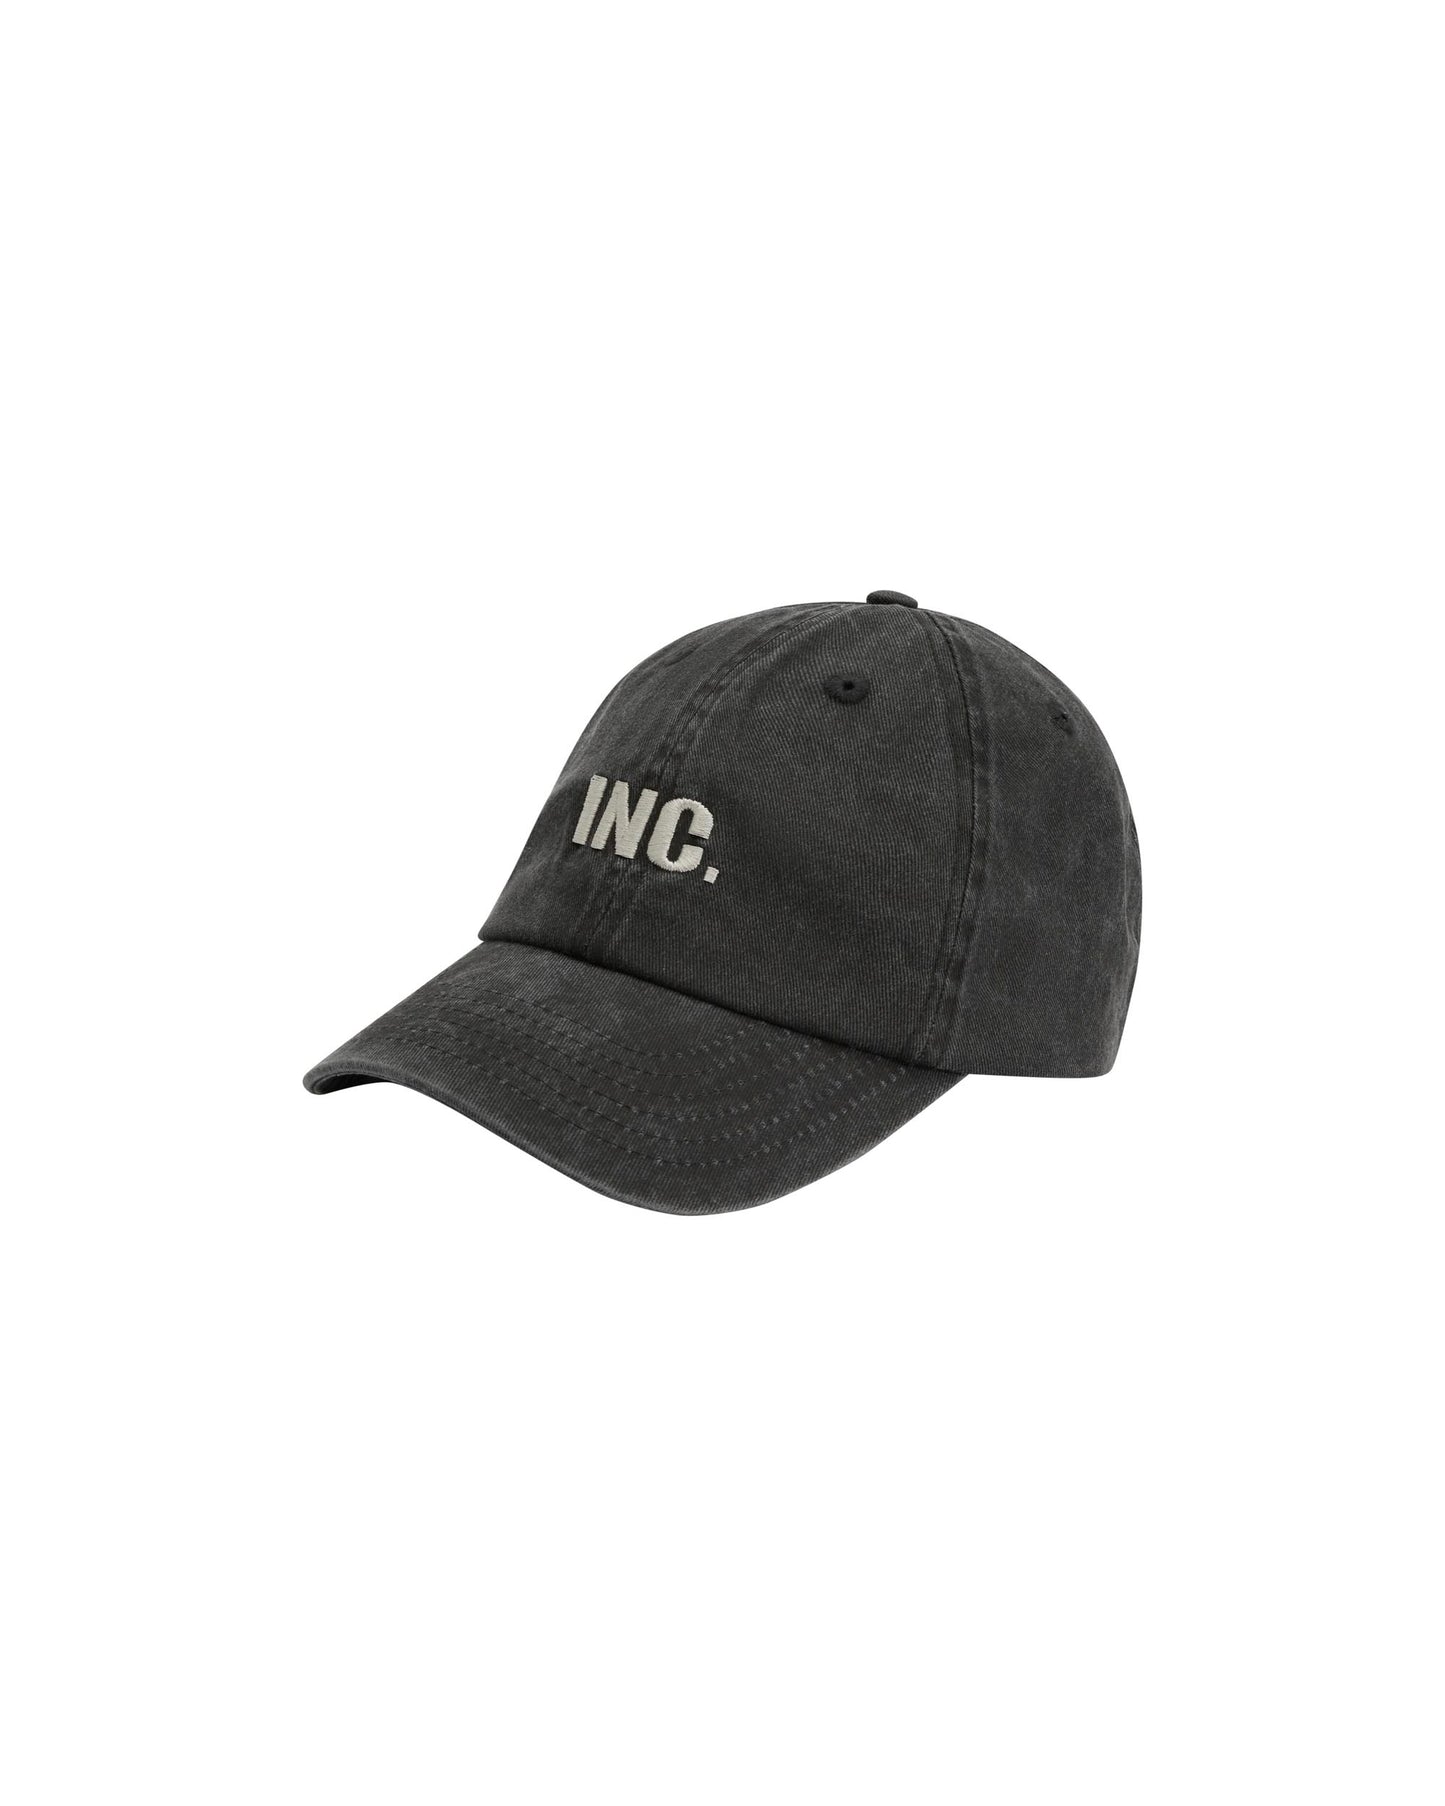 It's Now Cool Accessories - The Dad Cap - Washed Black